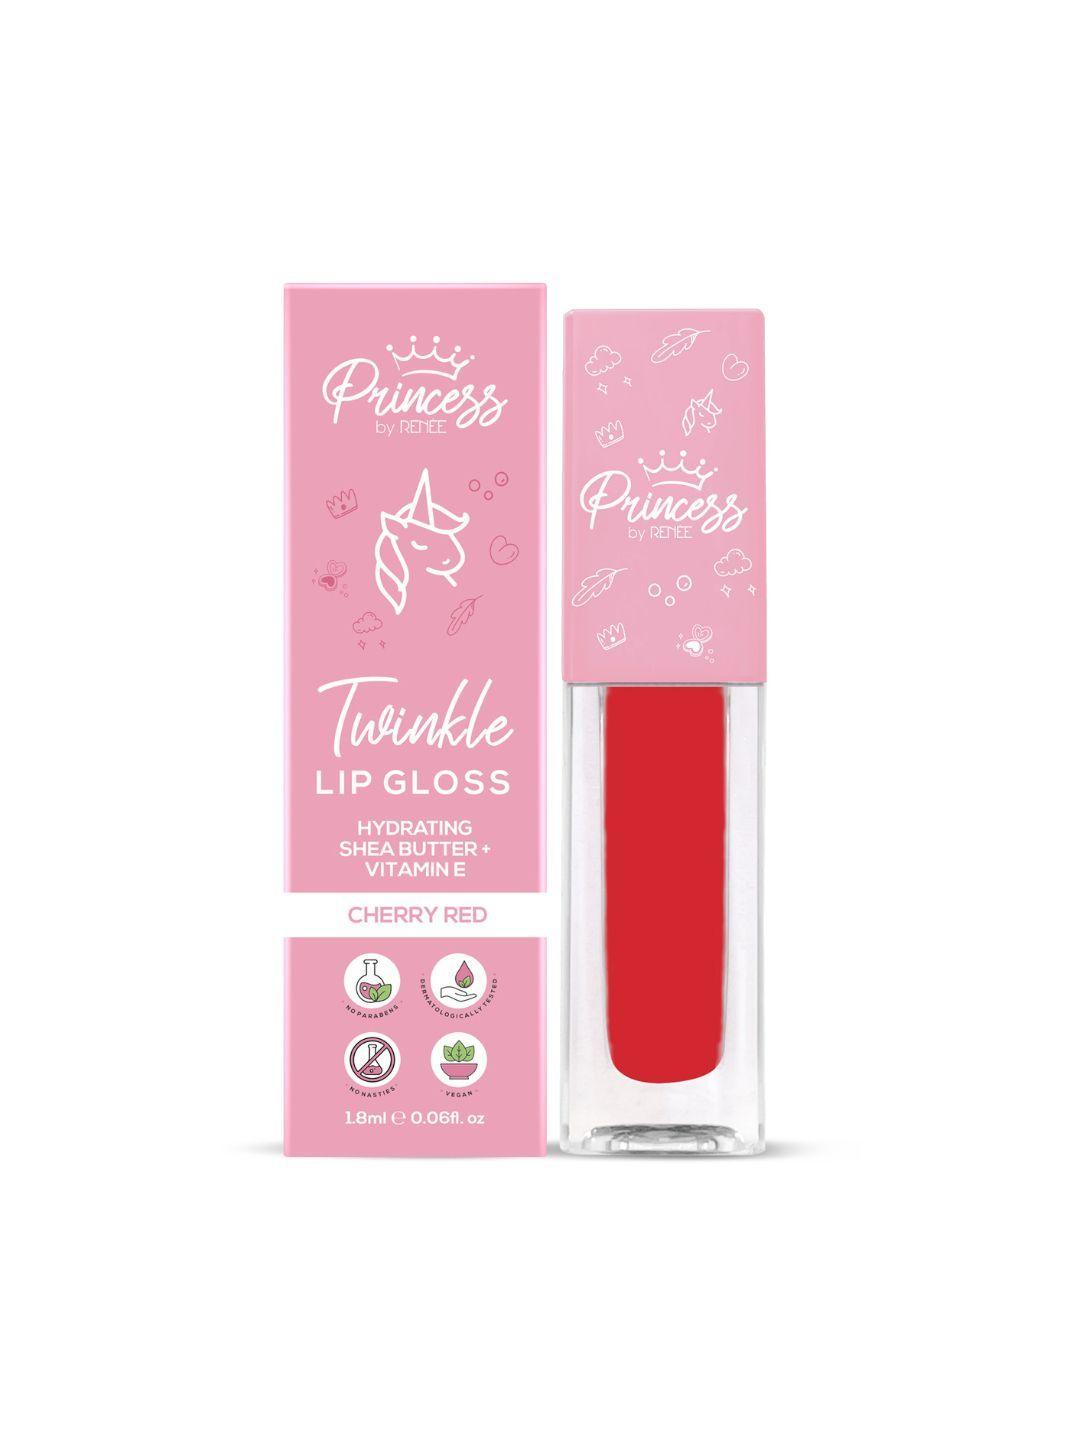 renee princess hydrating twinkle lip gloss with shea butter & vitamin e 1.8ml - cherry red